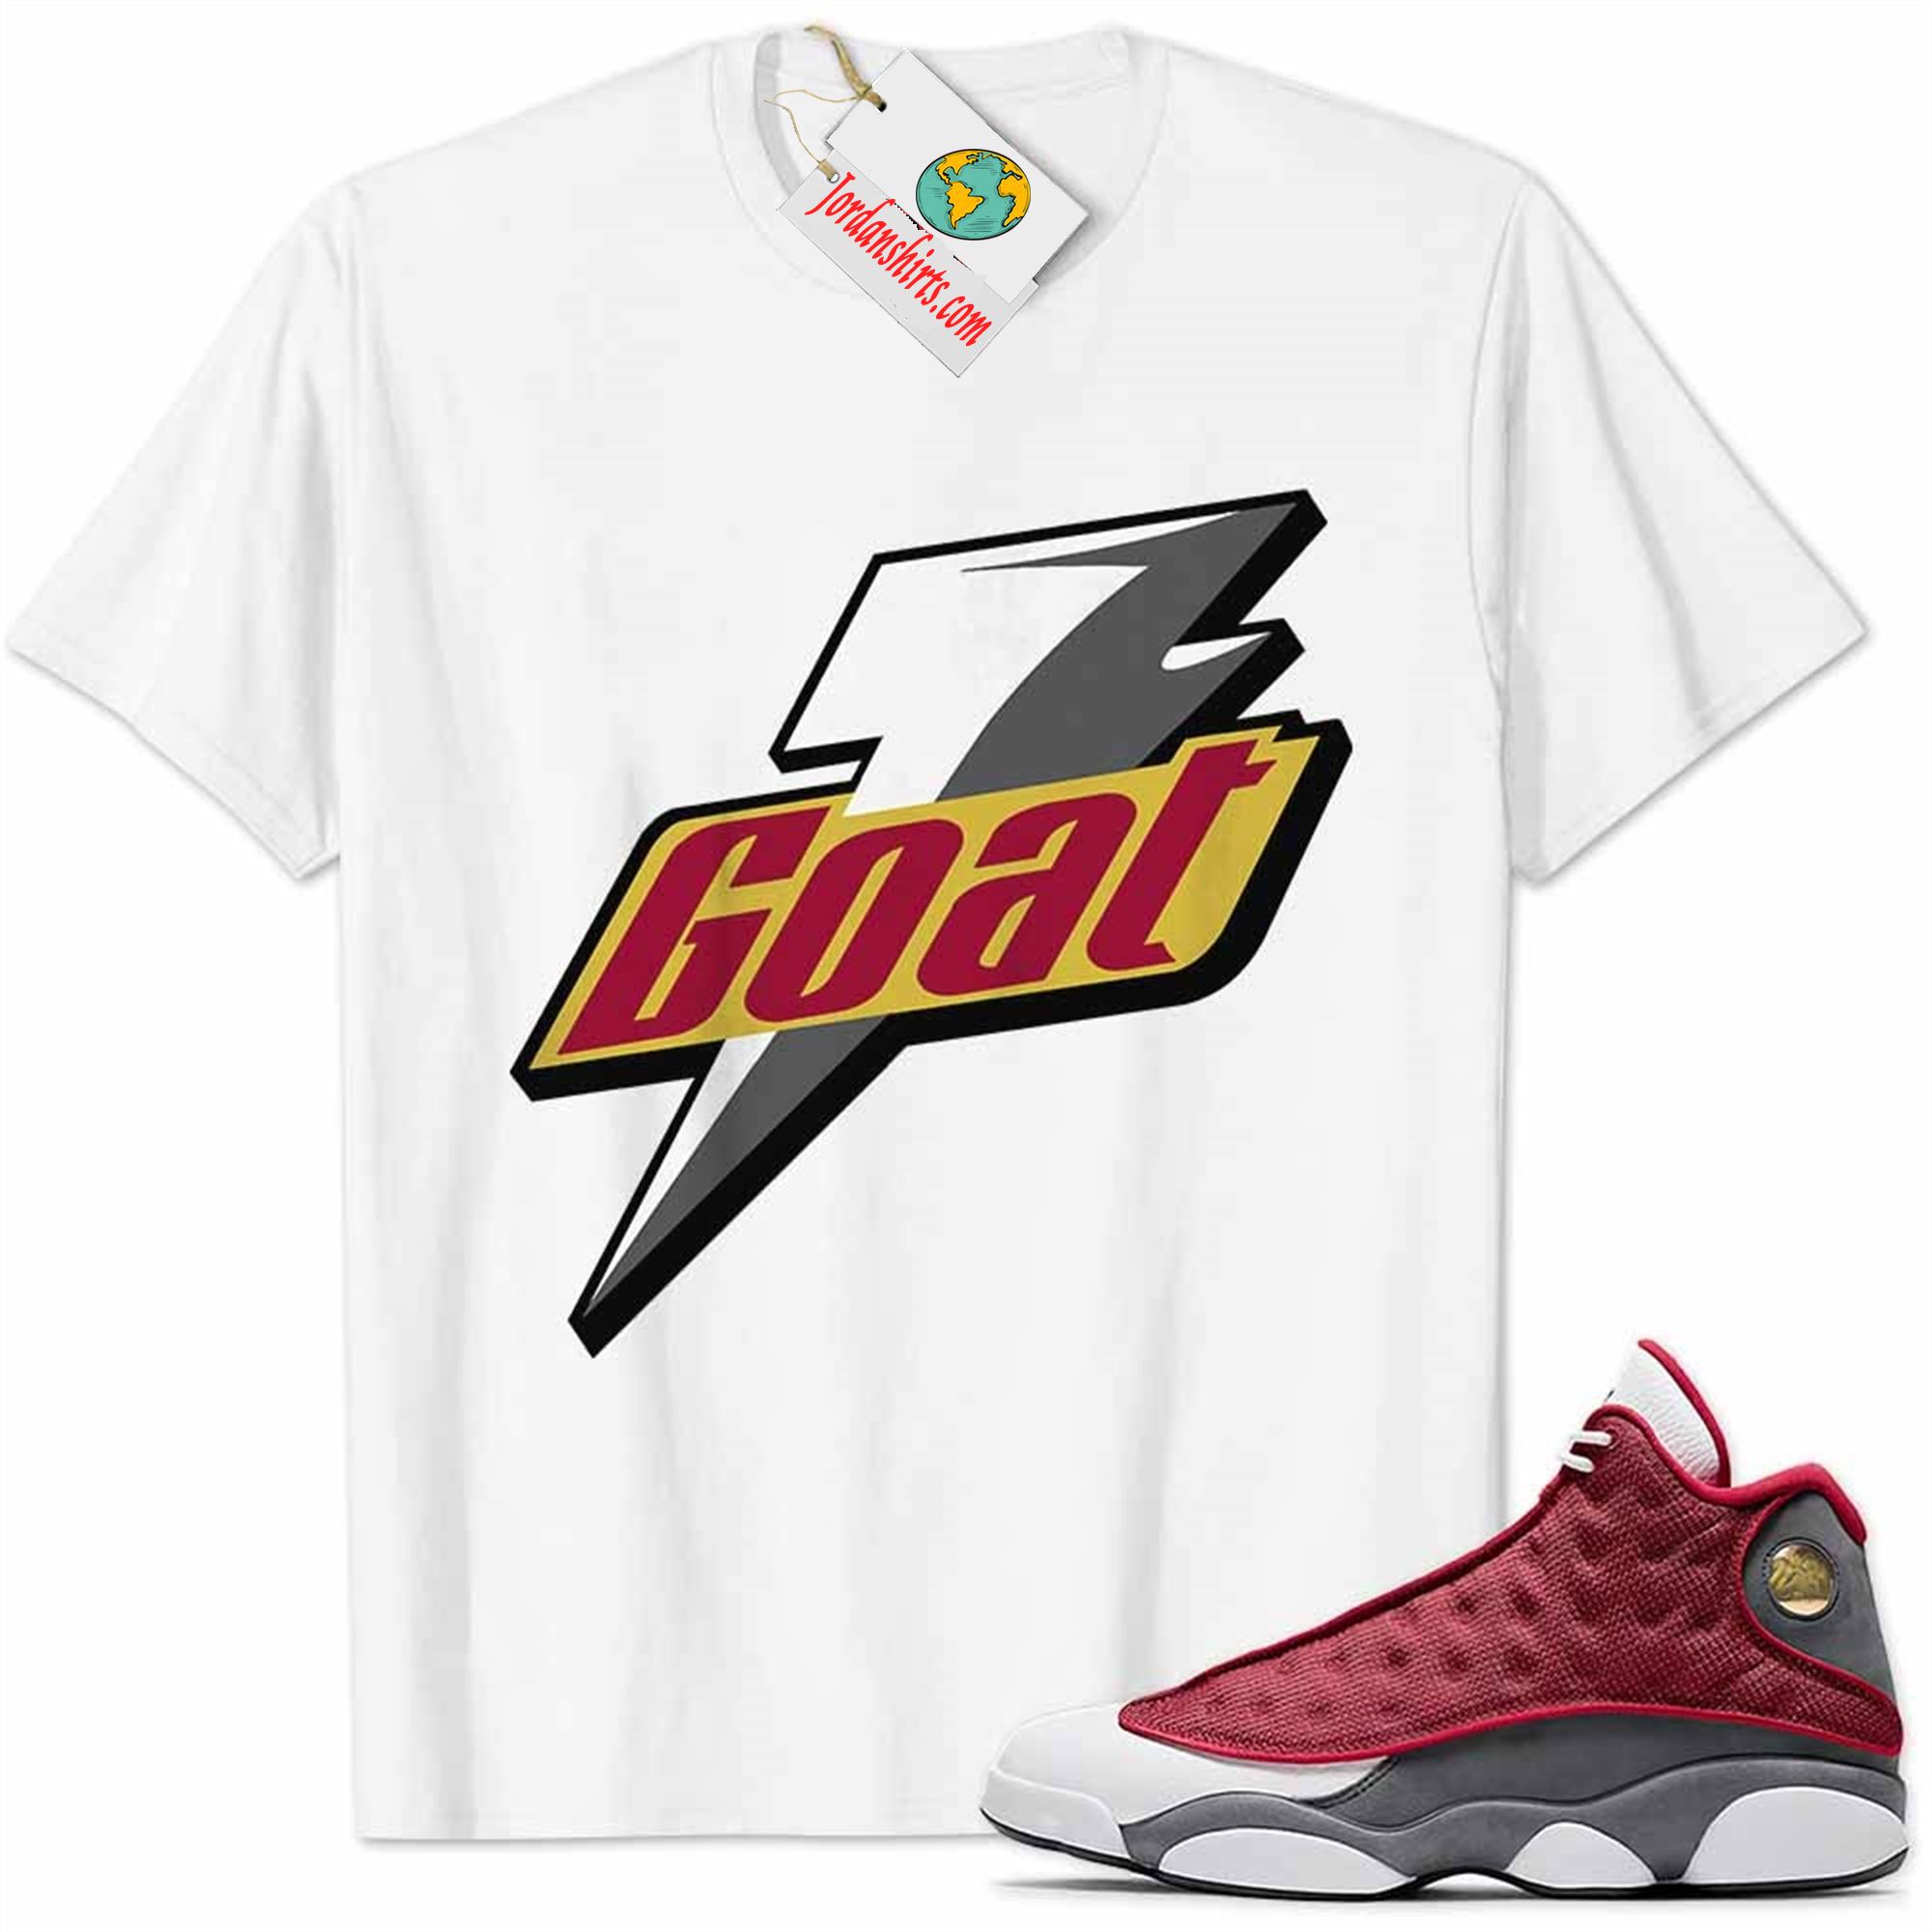 Jordan 13 Shirt, Red Flint 13s Shirt Goat Greatest Of All Time White Full Size Up To 5xl